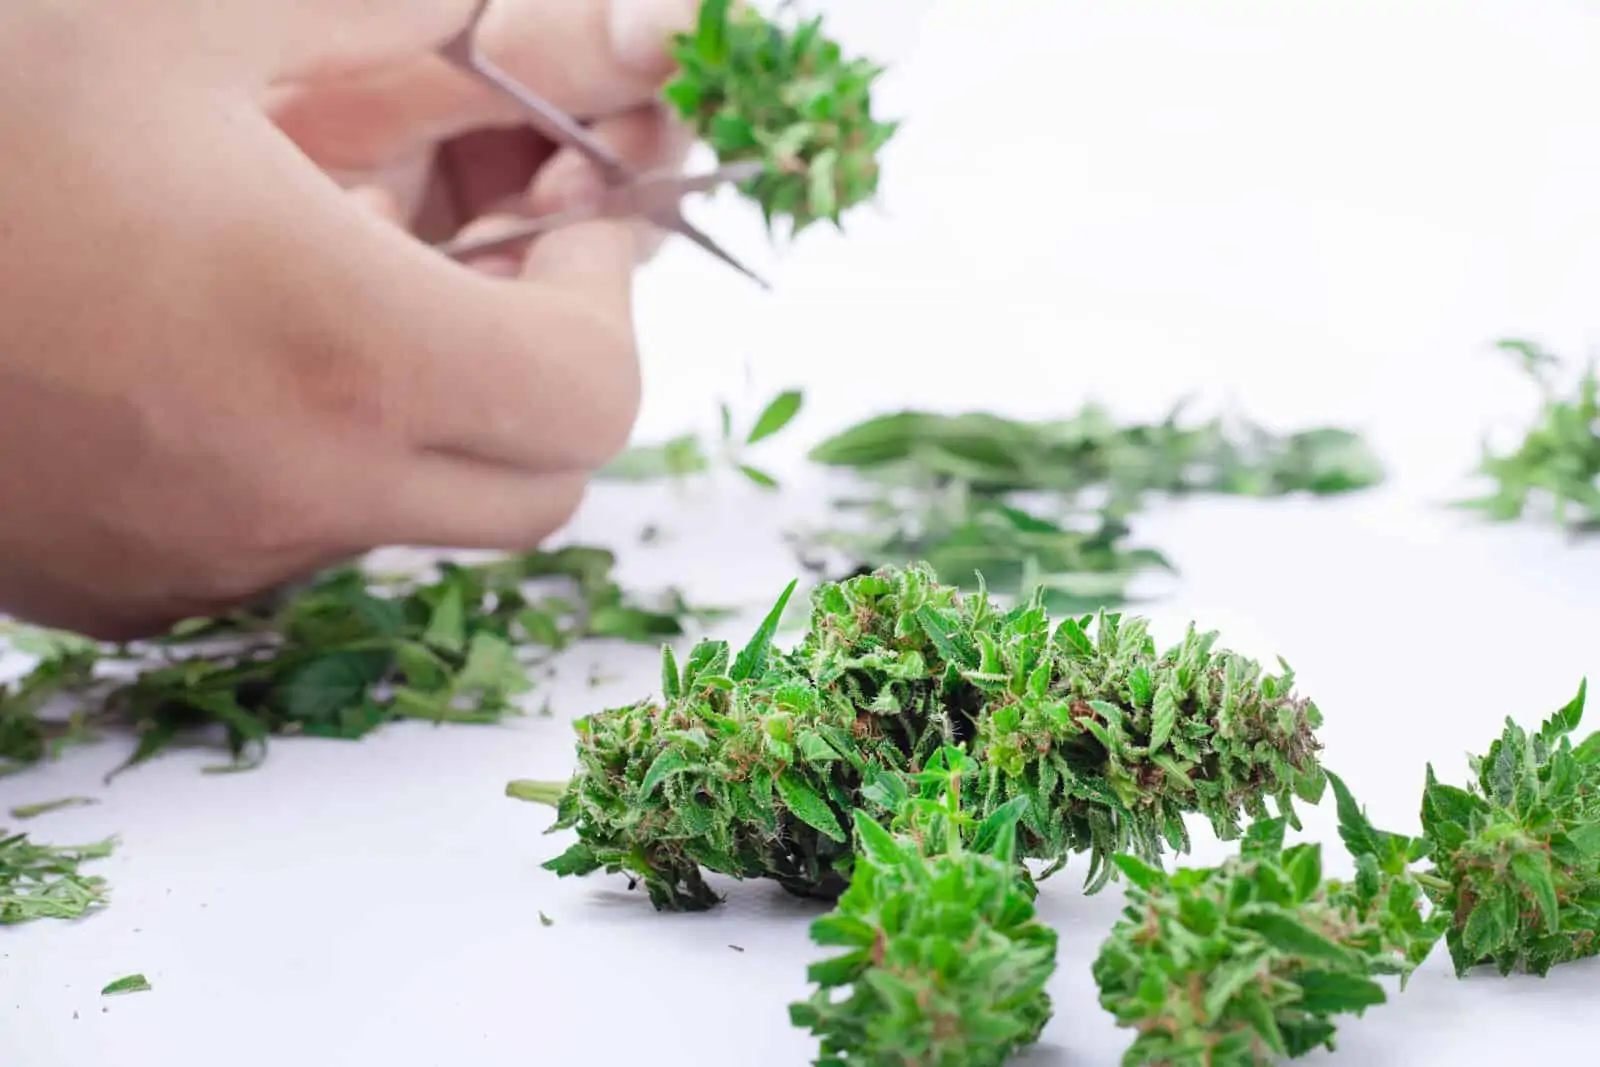 How to Find Weed Trimming Jobs for the Fall